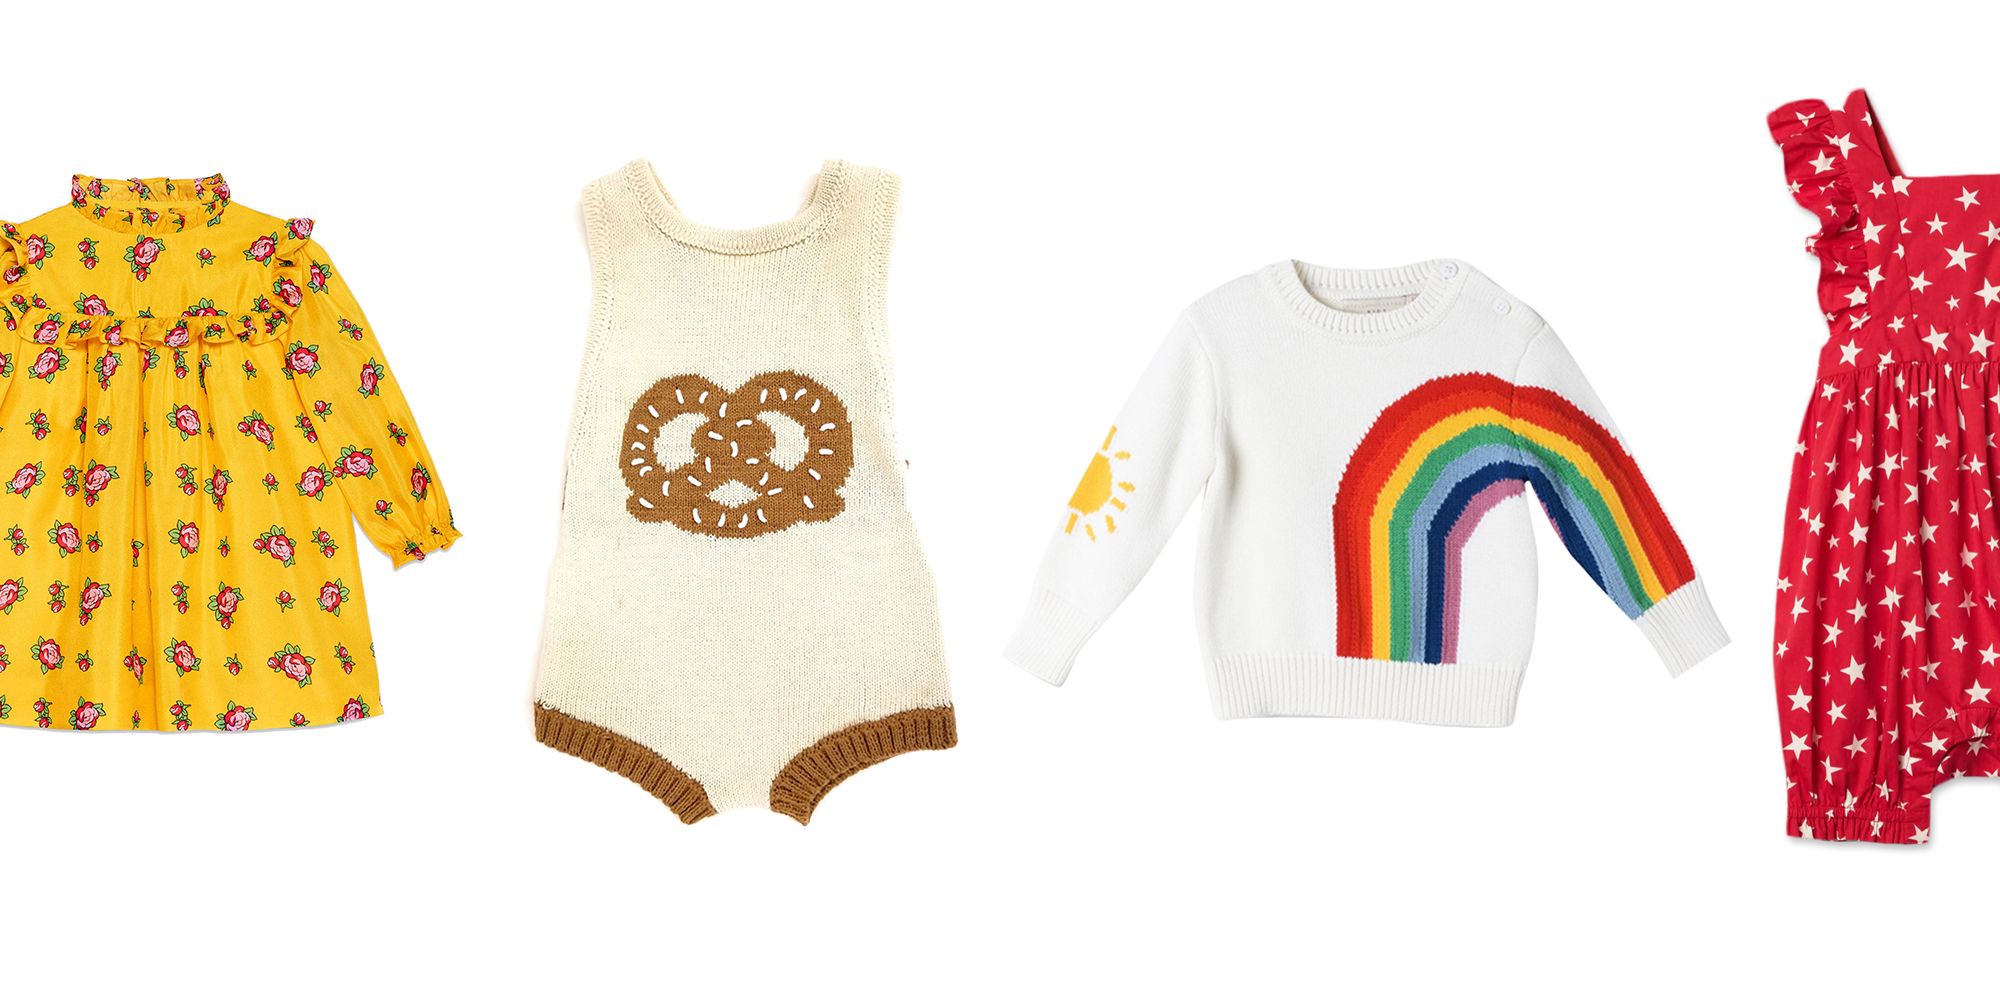 designer clothes for baby